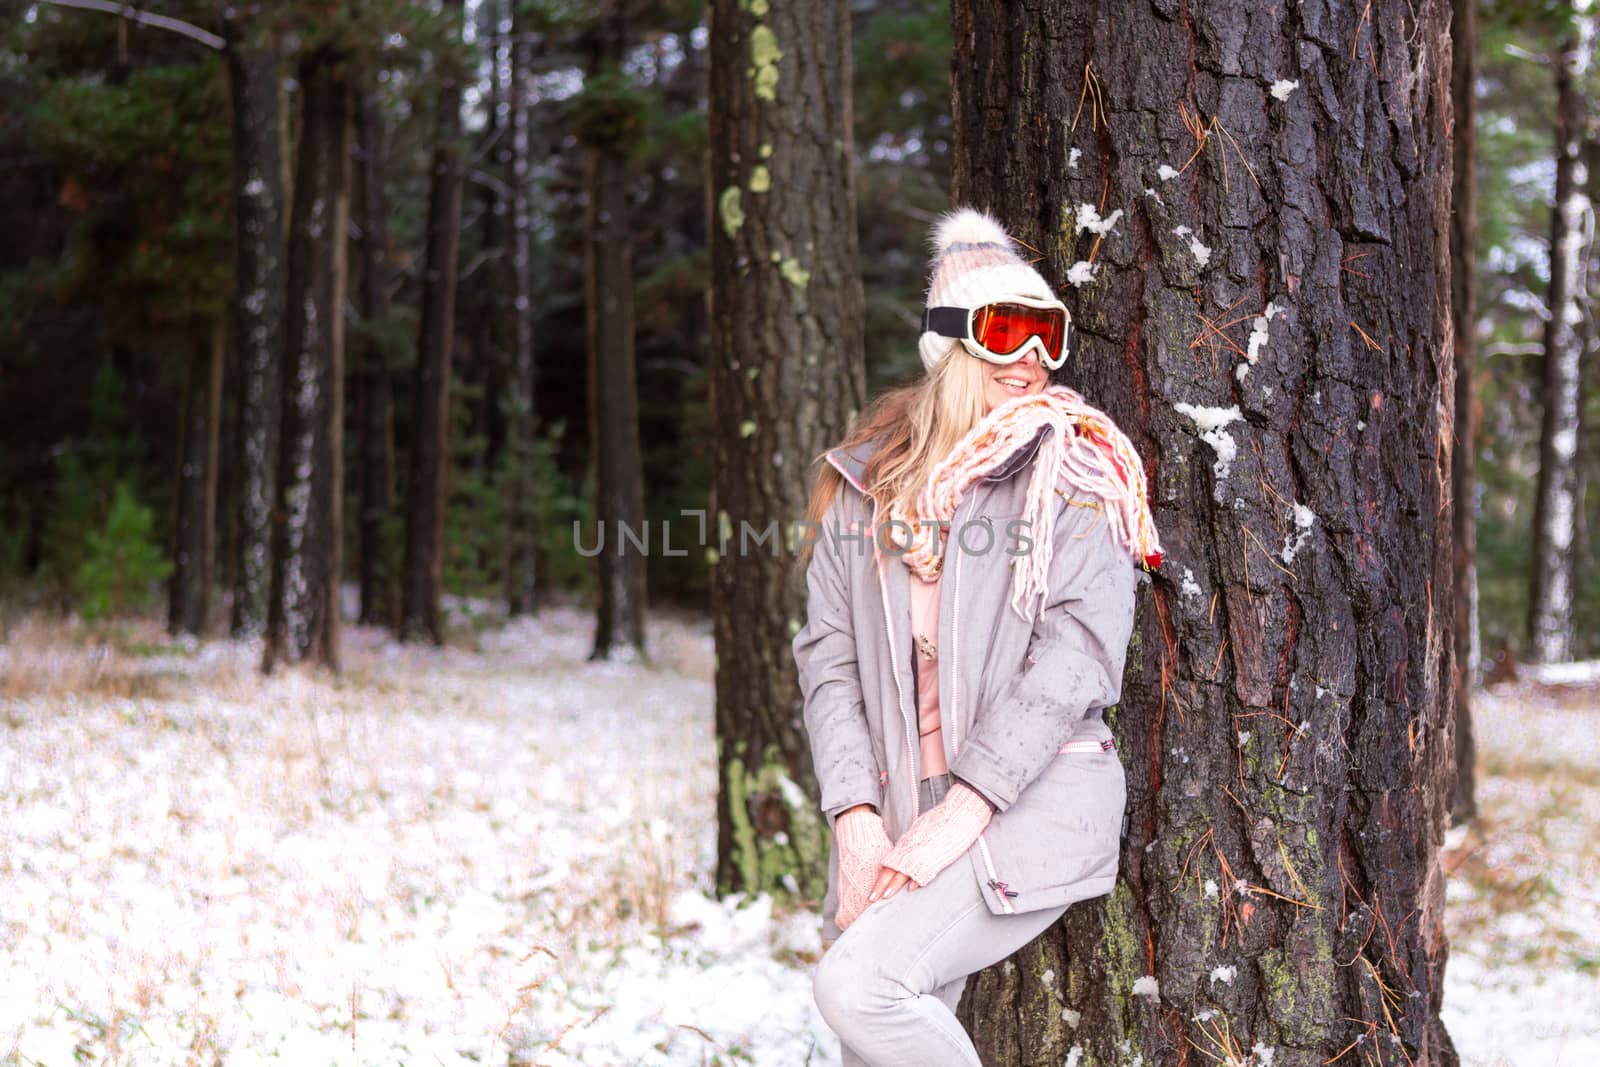 Woman leans against a tree in a snowy woodland of pine trees by lovleah